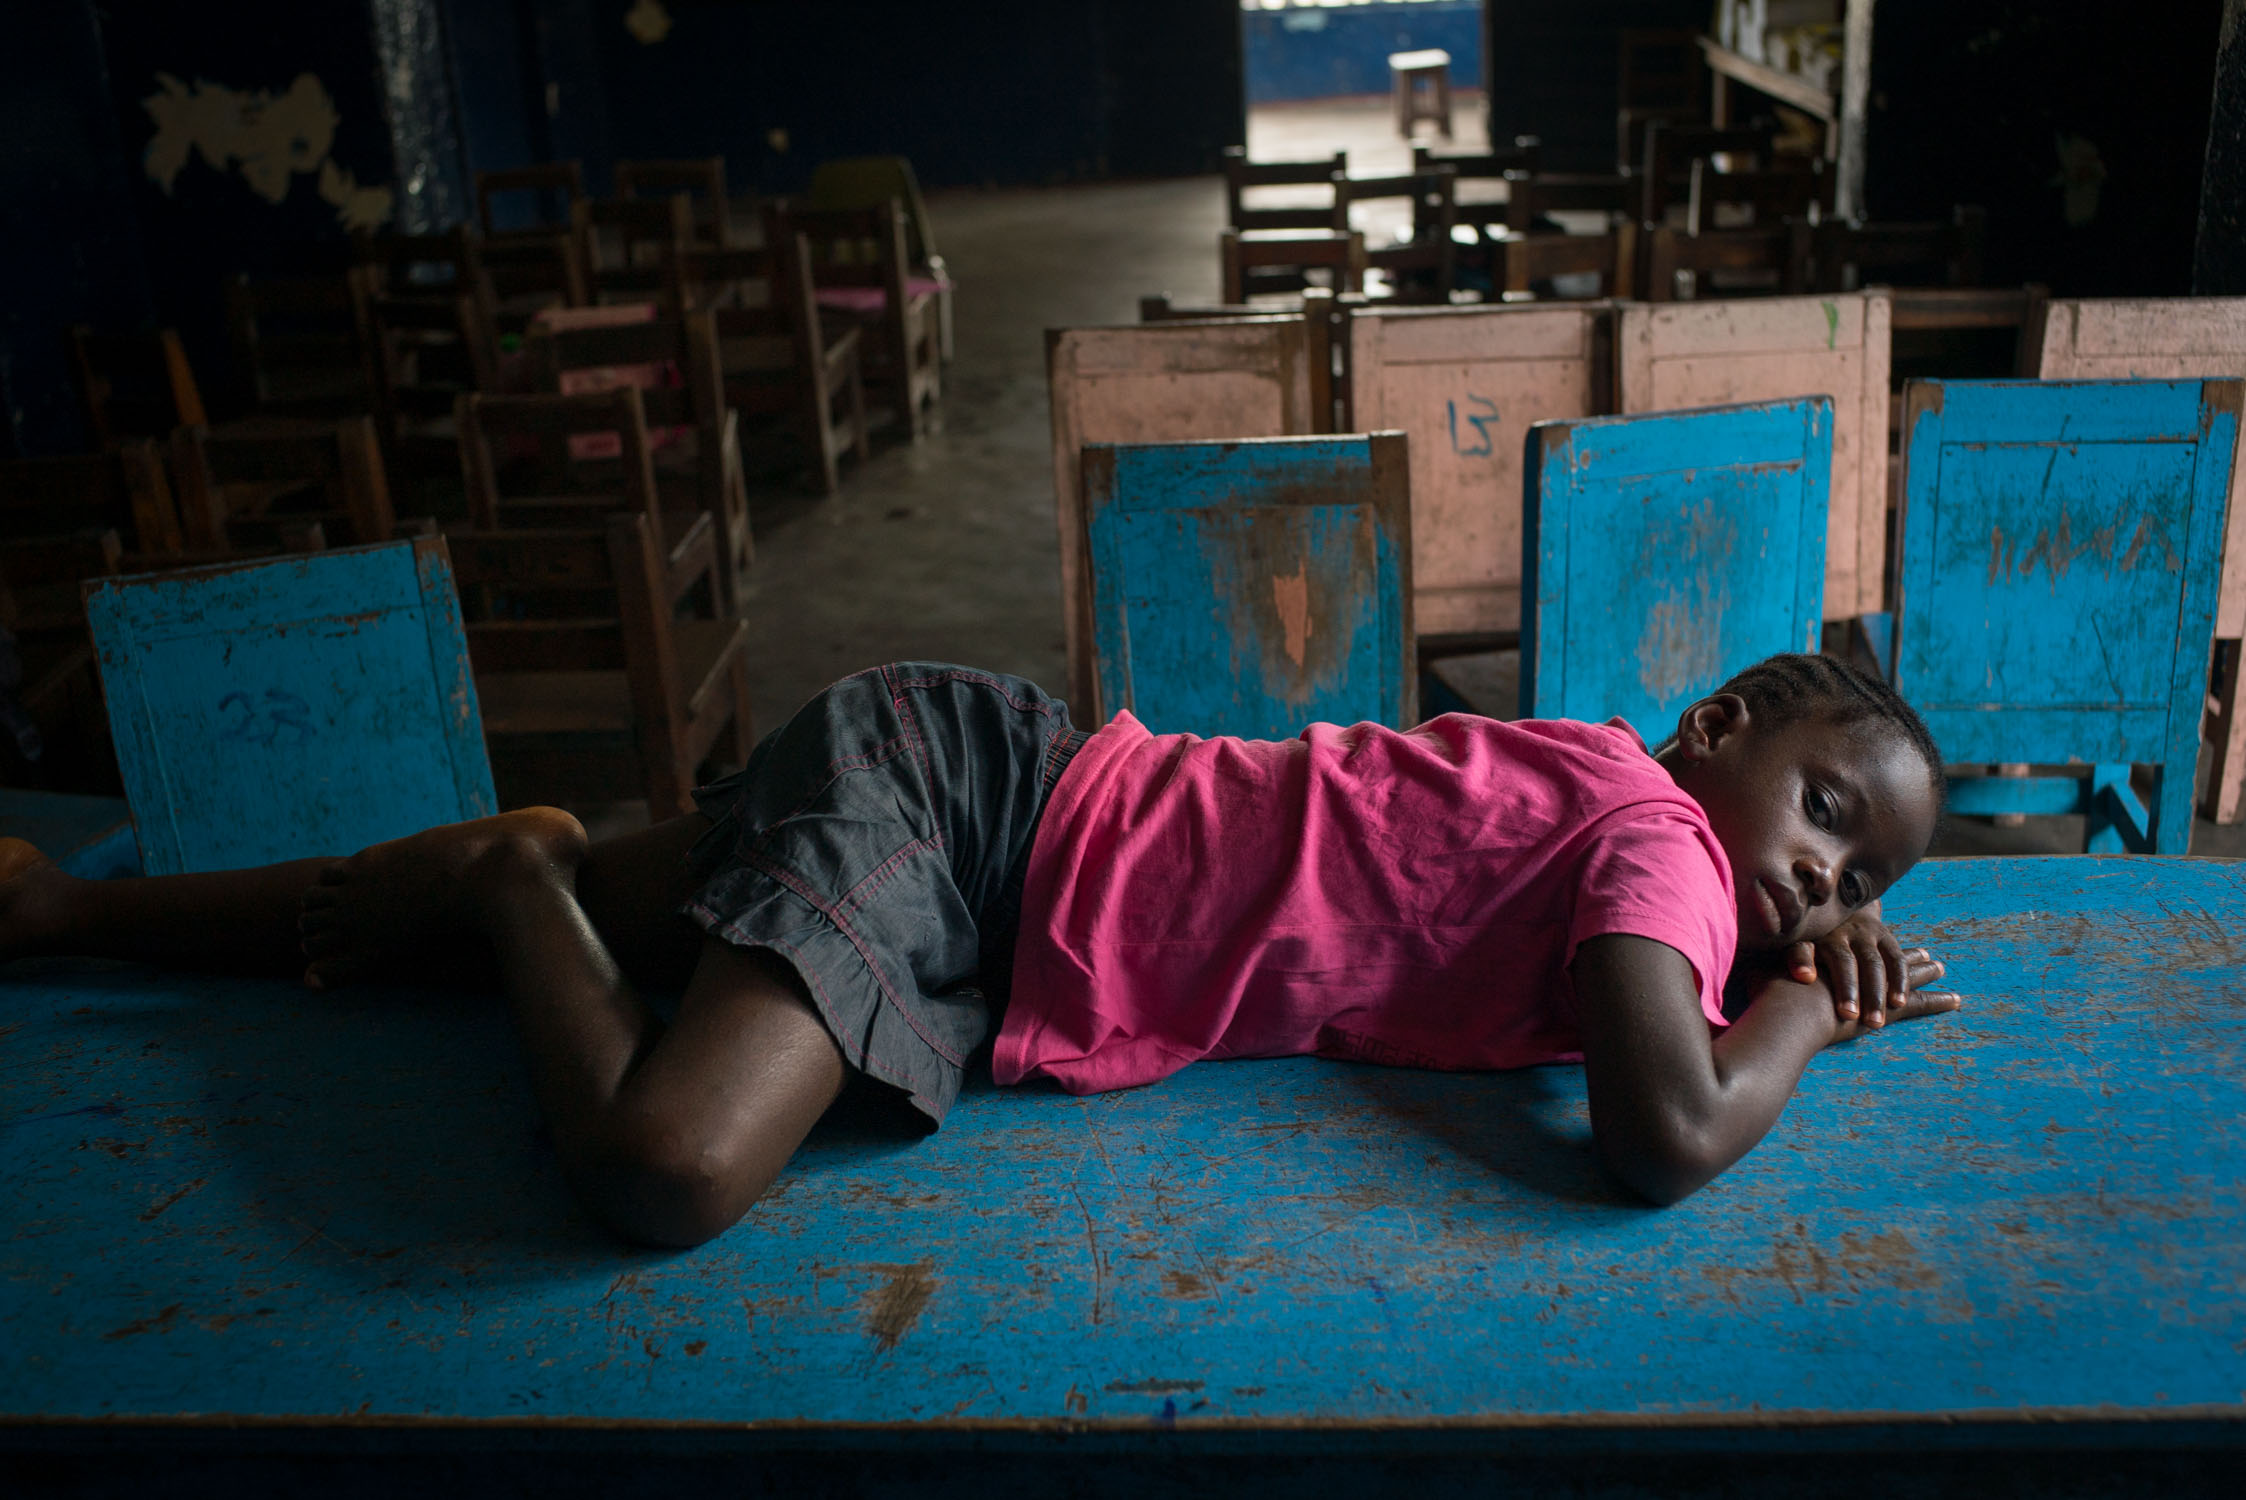  A youg girl suffering from malaria lies on a table after the classroom empties out at a Bridge school. One of the challenges to education in the developing world is that children come to school sick, so good schools usually supply medical referrals 